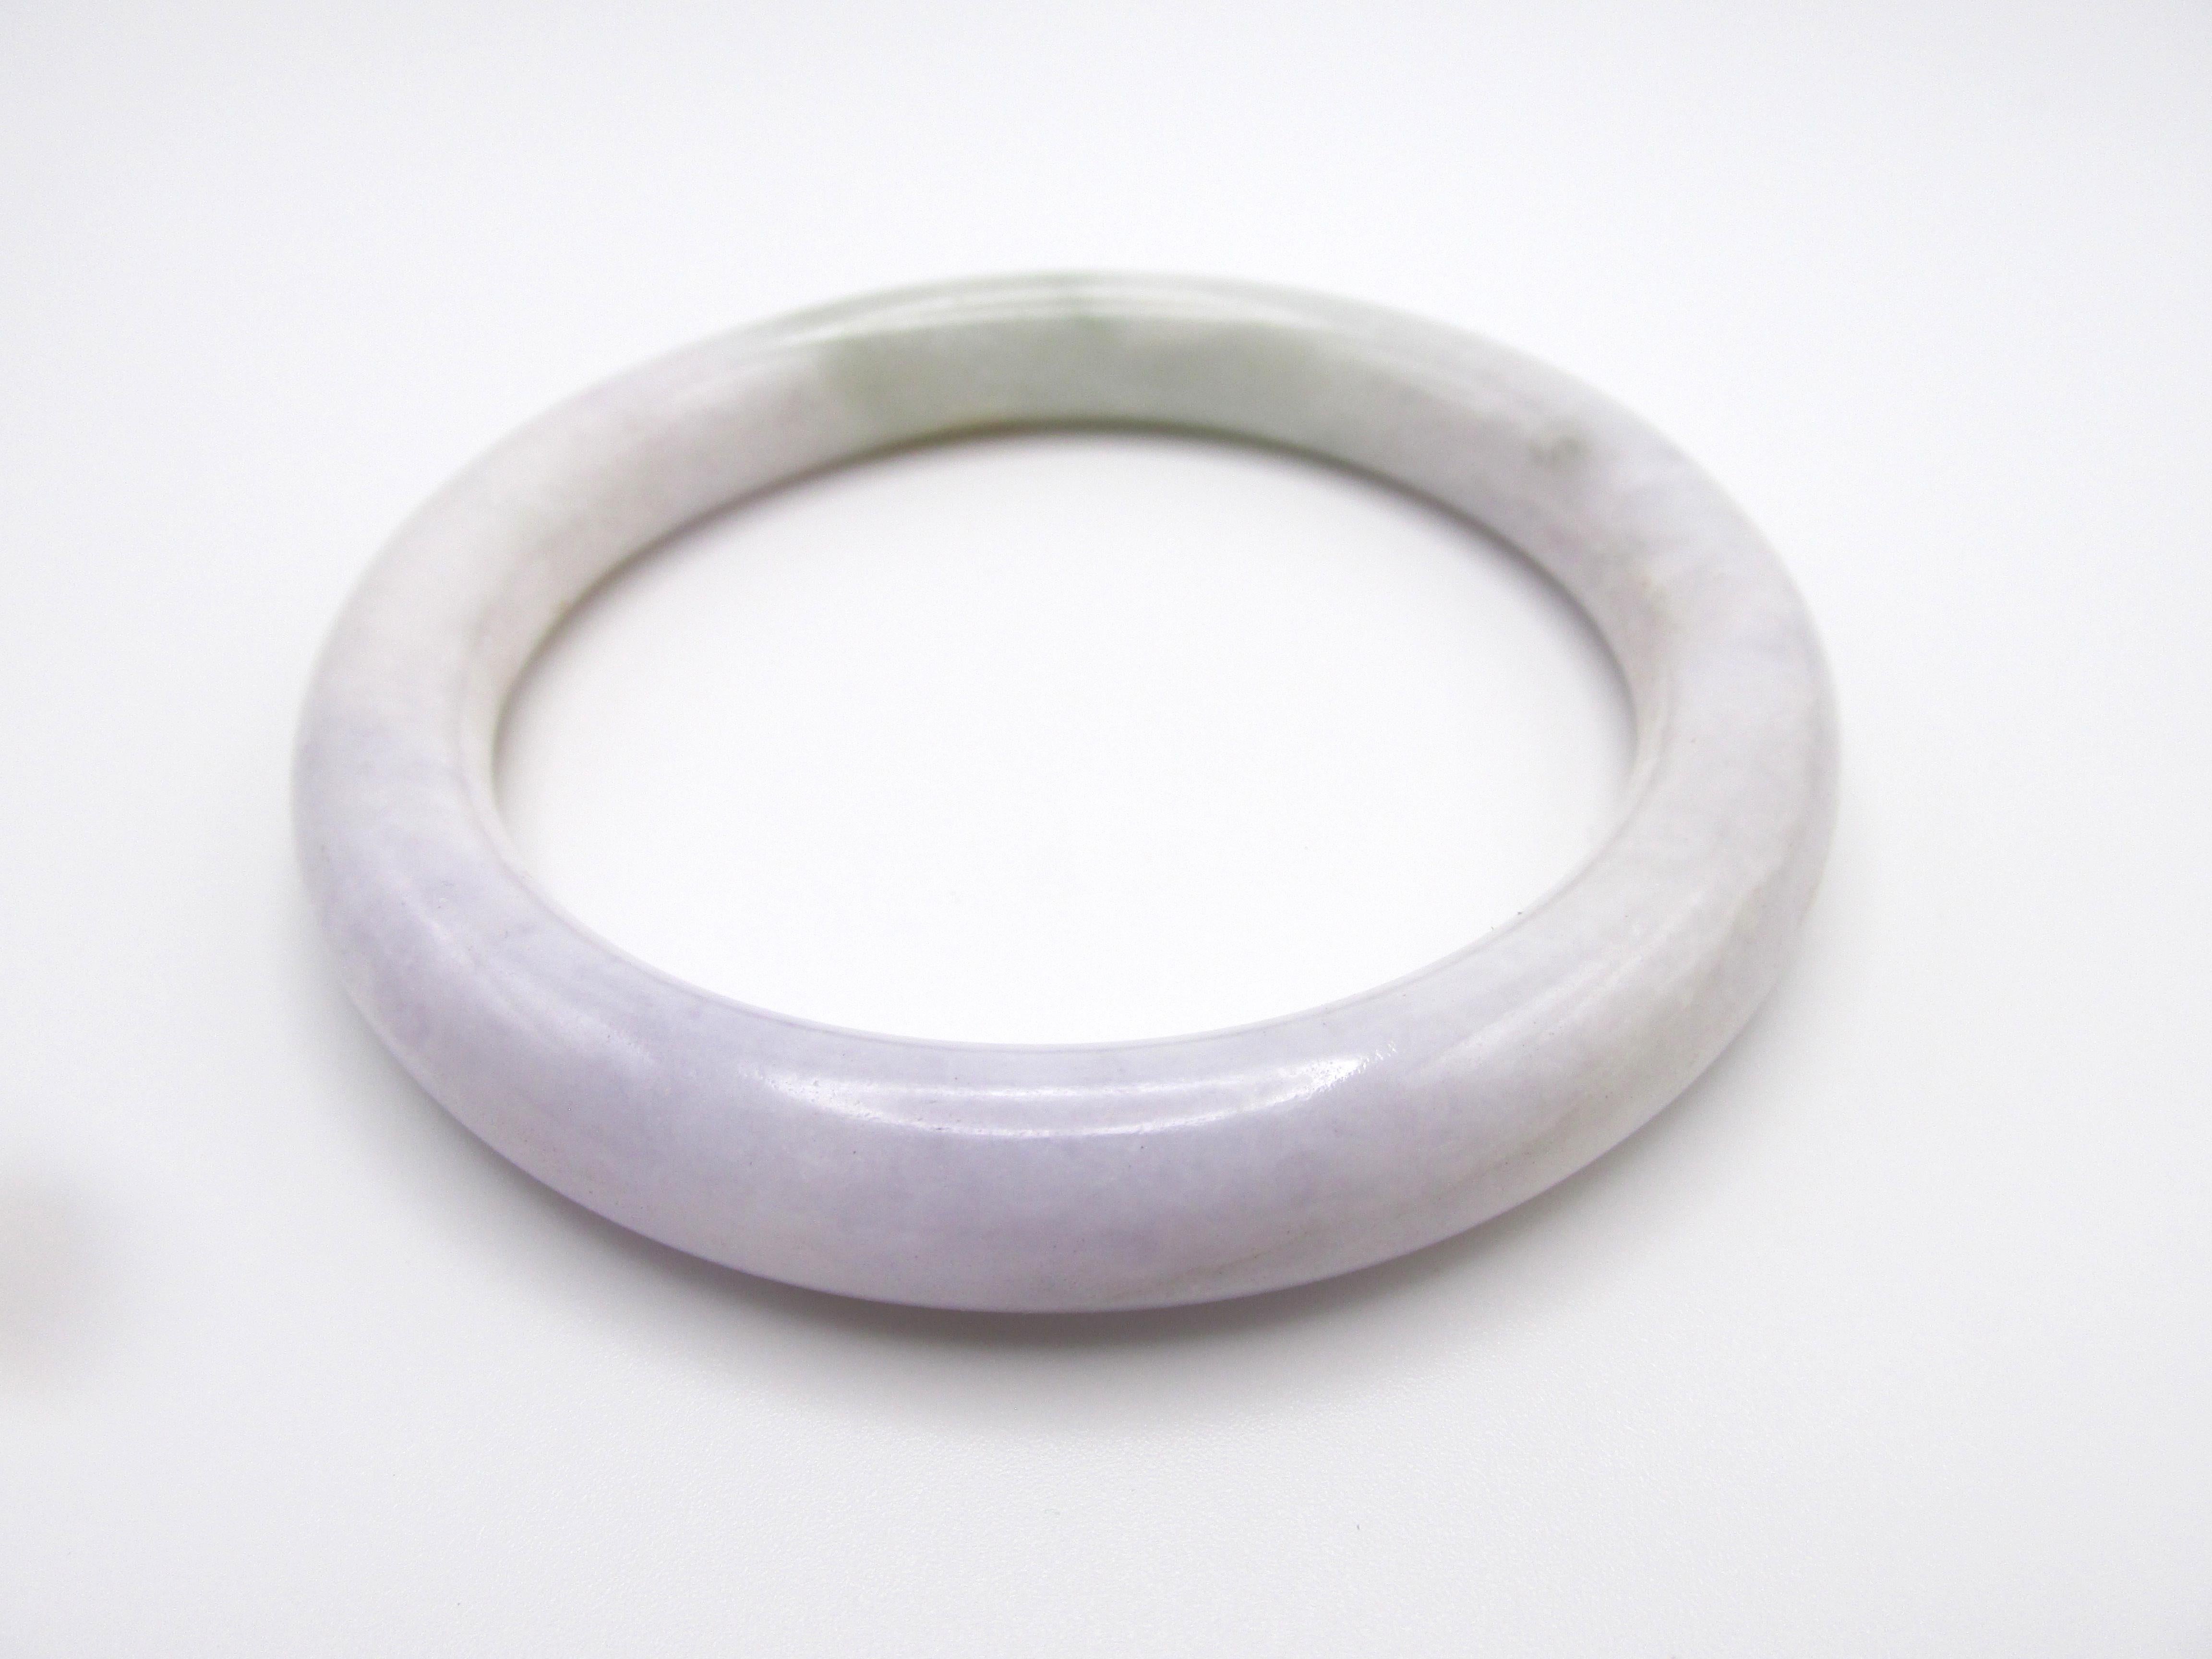 This large, jadeite bangle bracelet with an inner diameter of 61mm and a weight of 63.88 grams has beautiful subtle celadon and lavender coloring with a splash of brown.  Surface reaching inclusions.